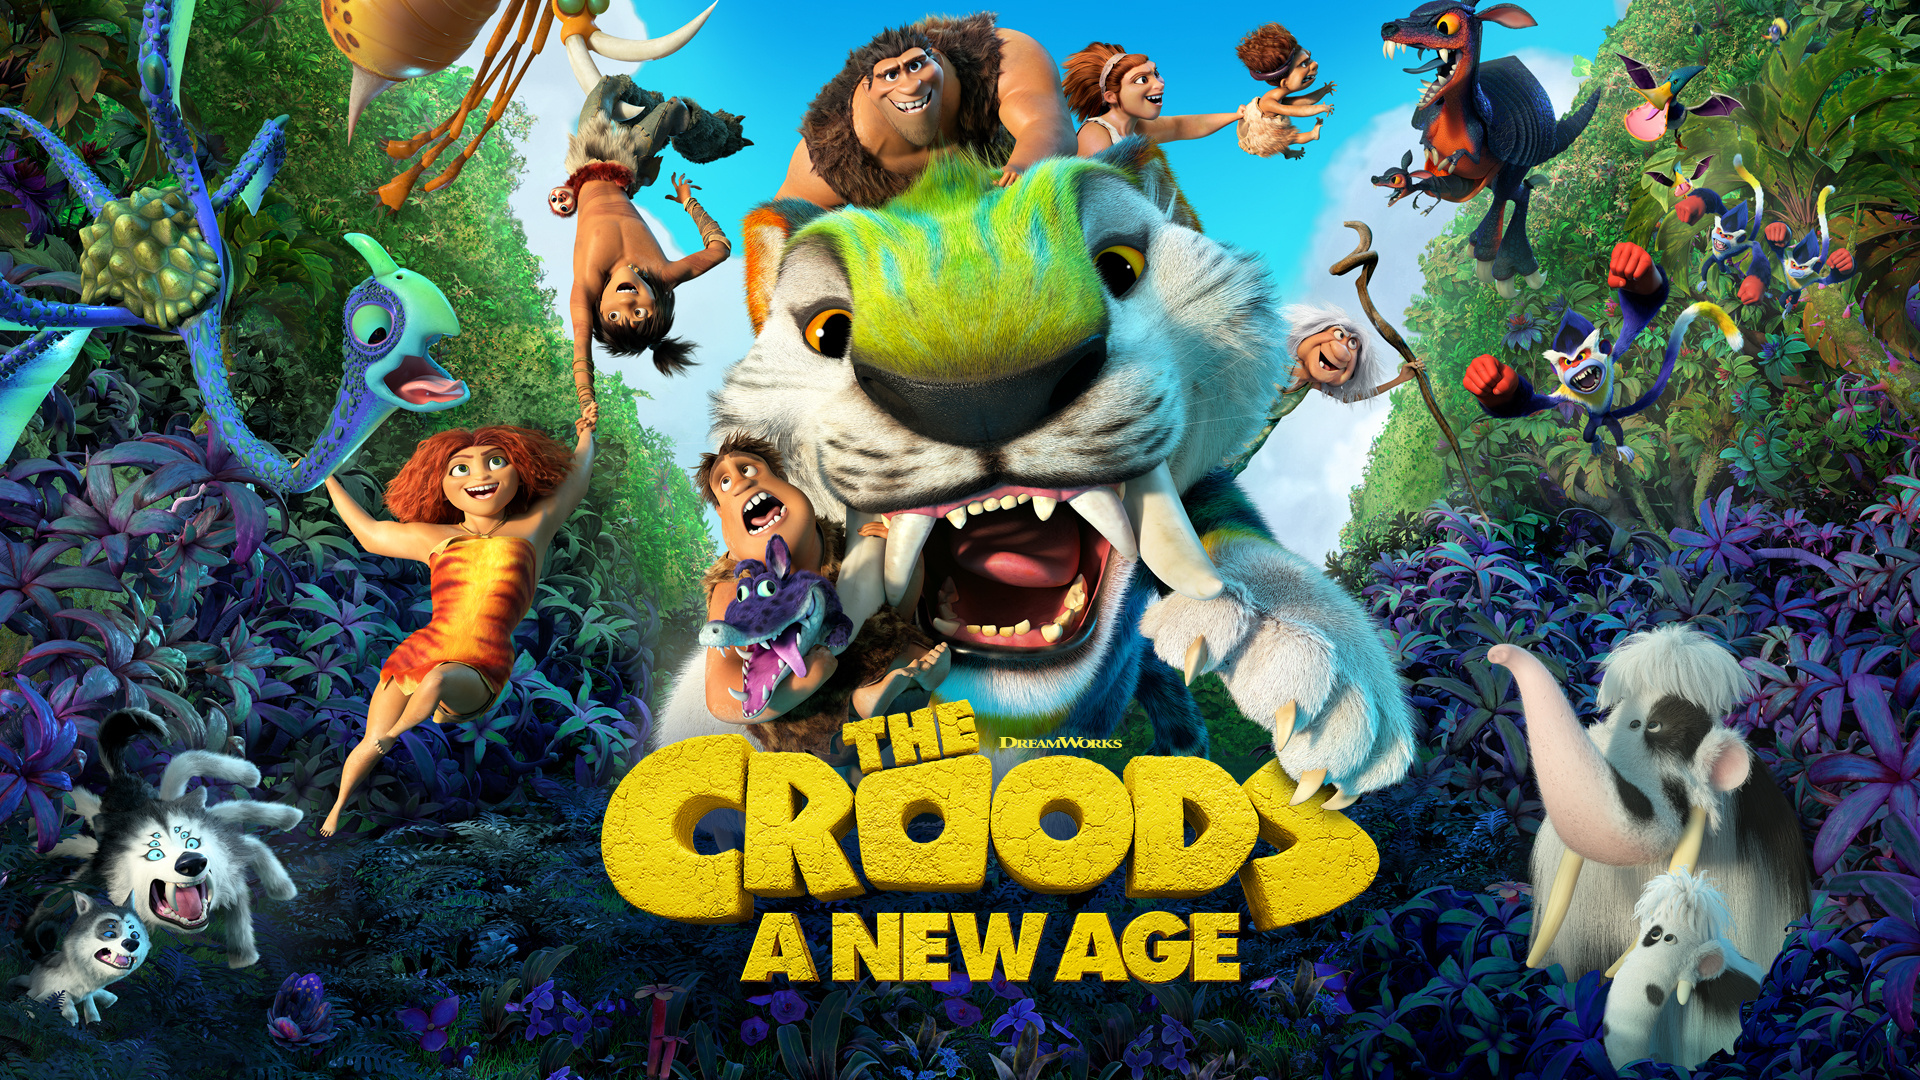 Croods: A New Age, Photo galleries, Animated adventure, Family entertainment, 1920x1080 Full HD Desktop